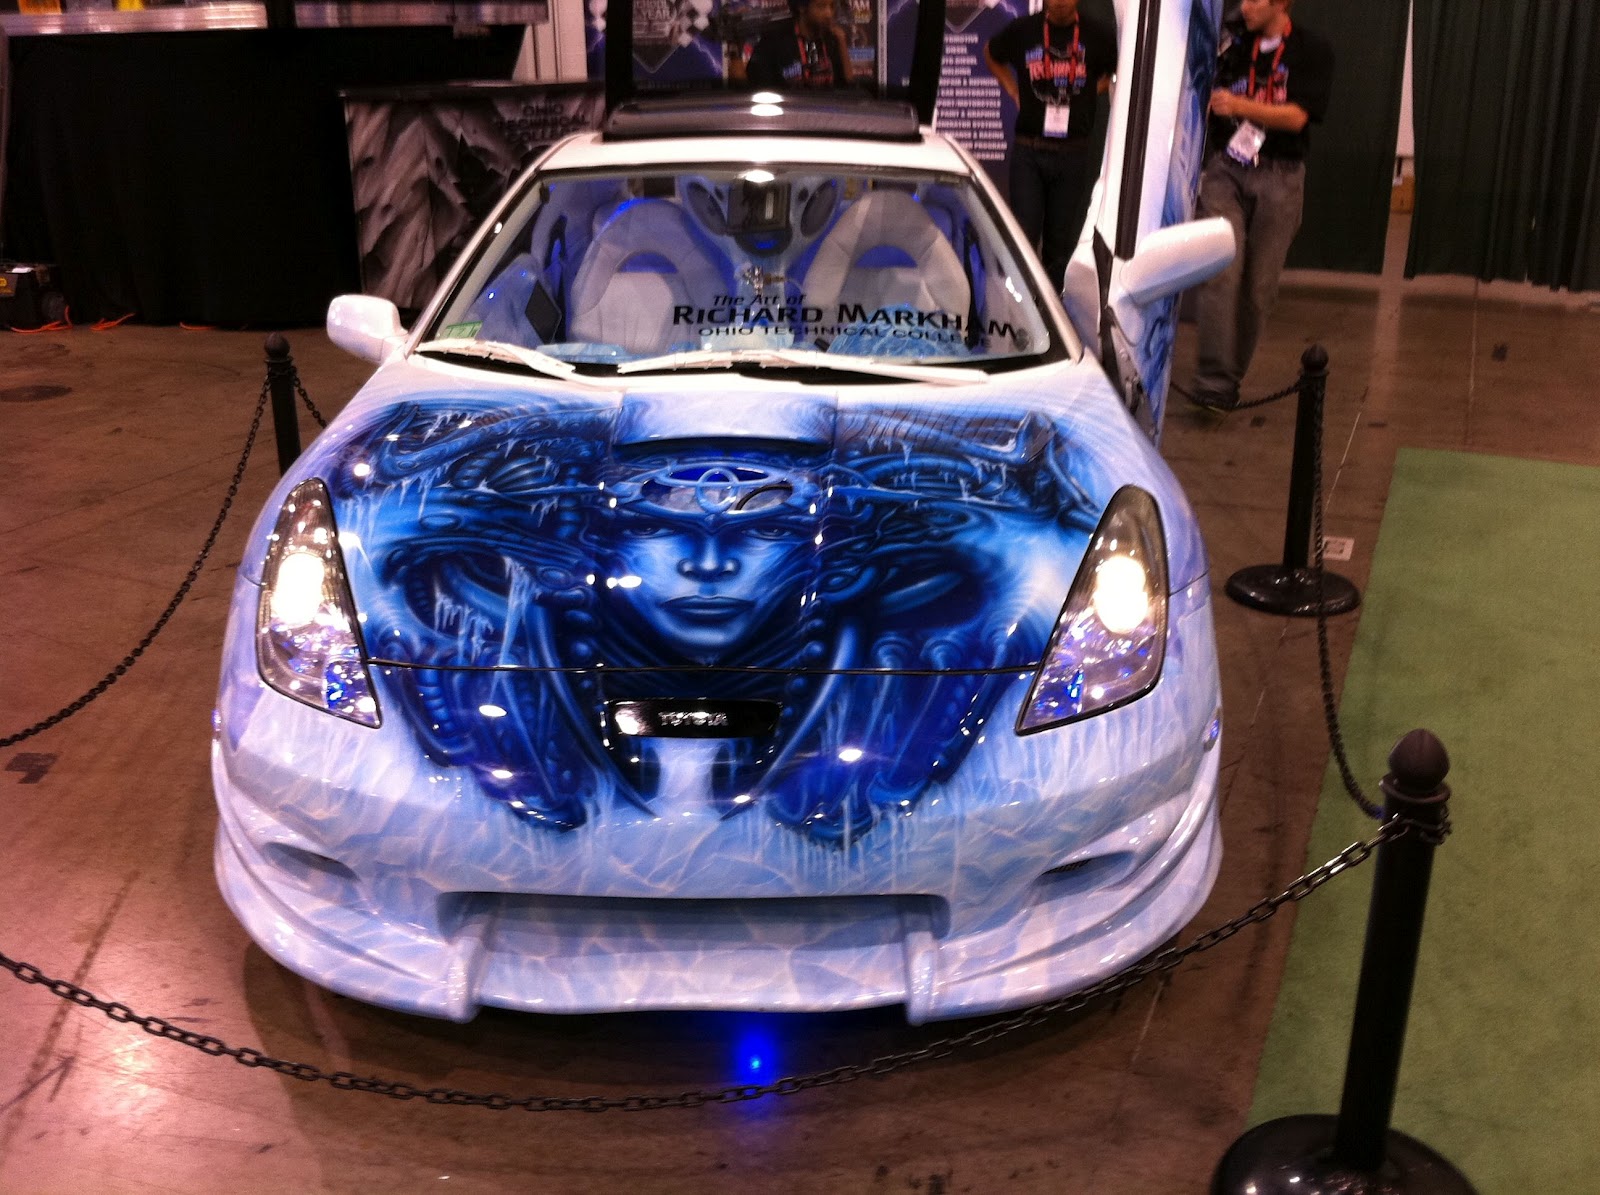 Inspired Ambitions Airbrush  Art on Cars